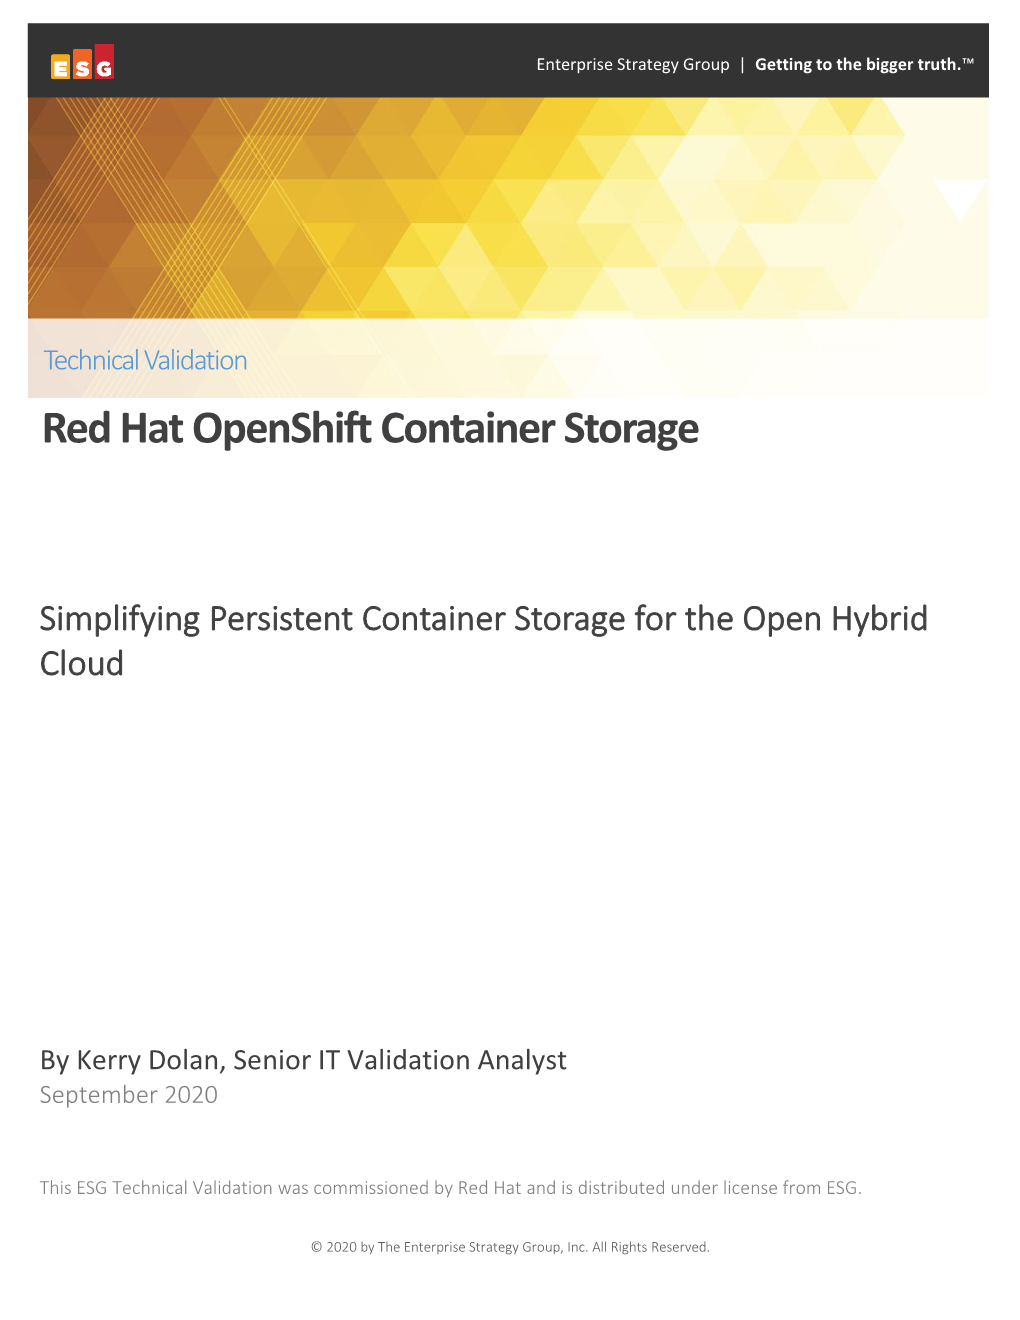 Red Hat Openshift Container Storage